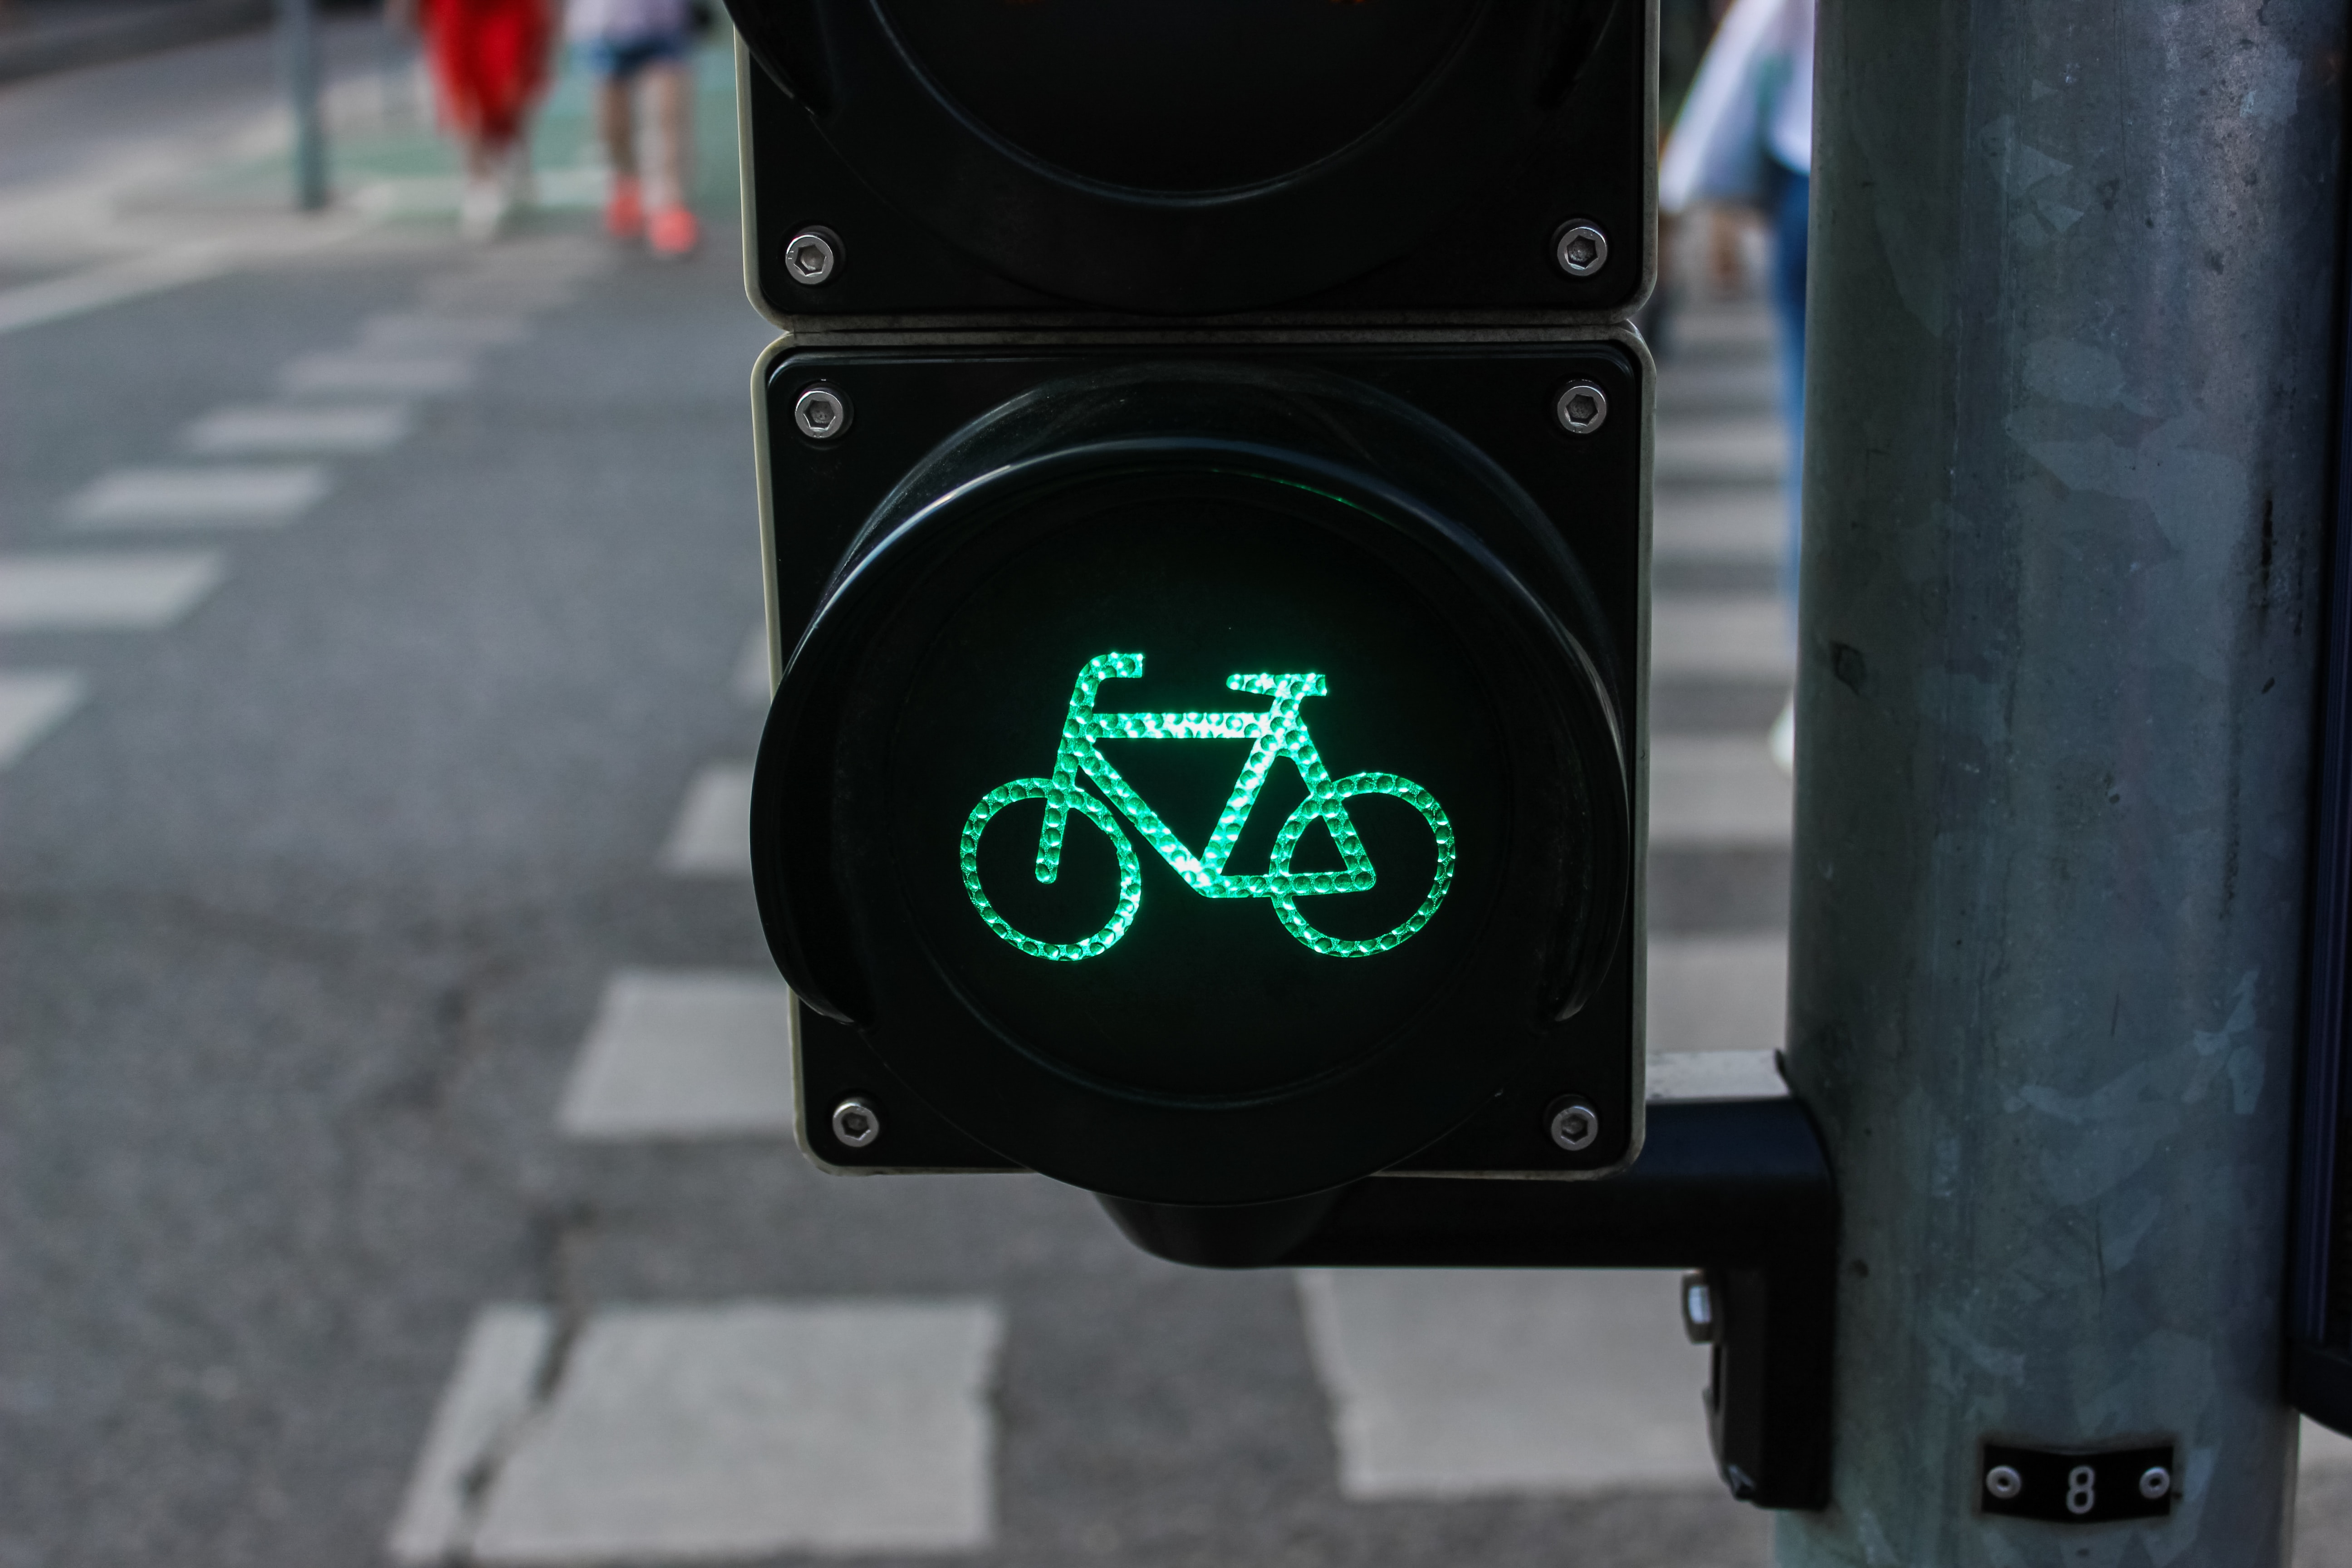 Disruption, an opportunity to facilitate long-term modal shift to cycling? Stories, lessons and reflections from the COVID-19 pandemic